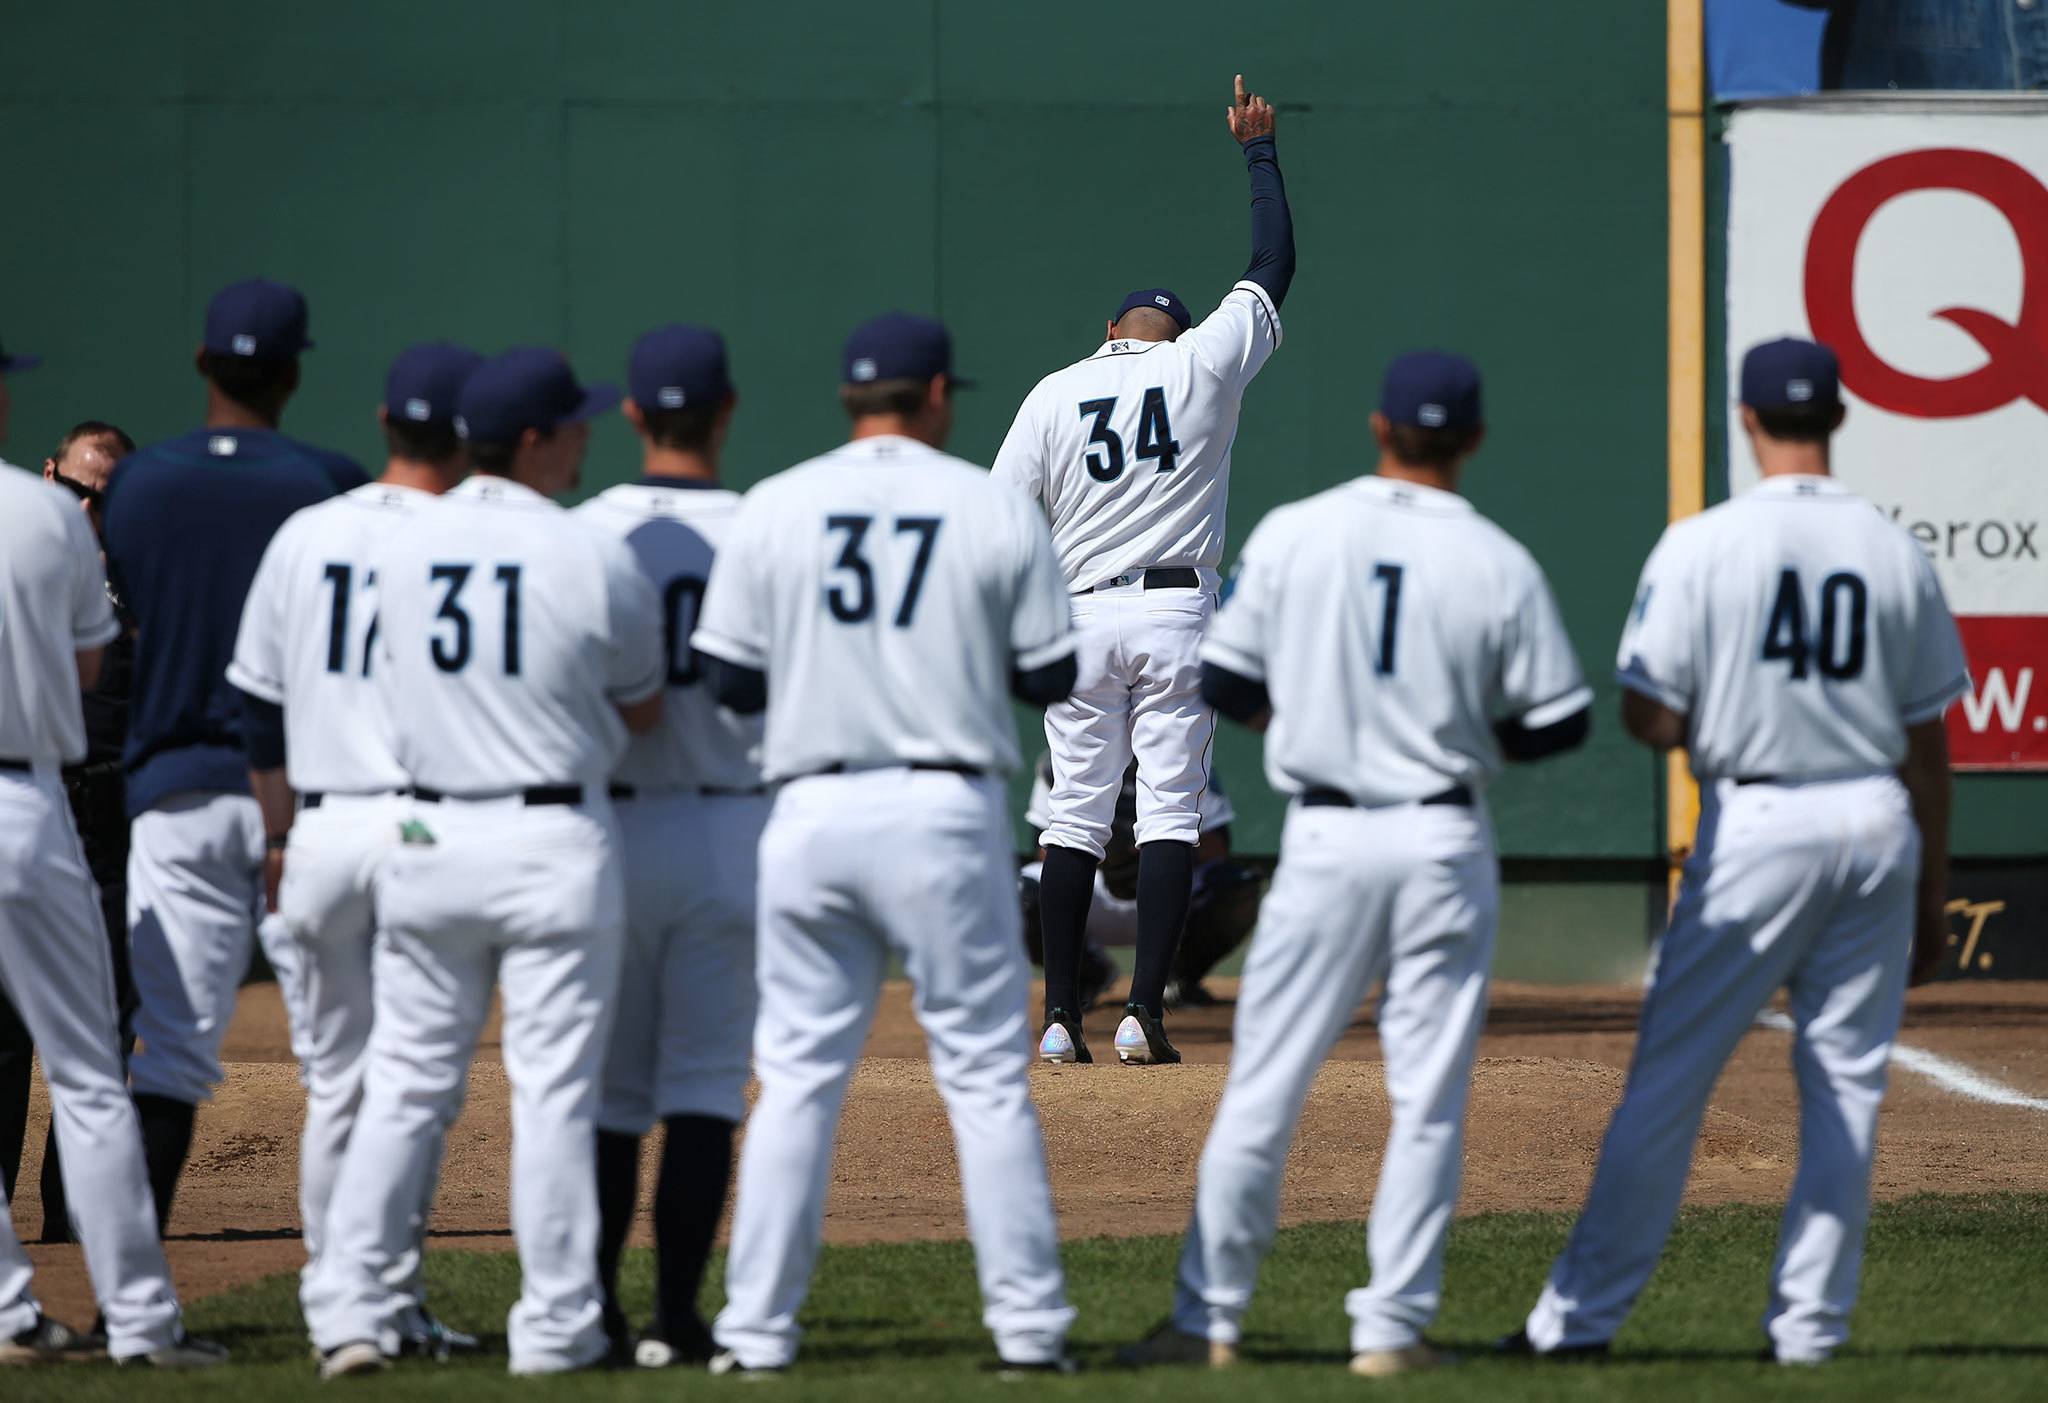 While Everett players watch his warm-up, Seattle Mariners’ ace Felix Hernandez holds up a finger at his introduction before the AquaSox played a game against the Spokane Indians at Everett Memorial Stadium on Sunday, July 10, 2016 in Everett, Washington. (Andy Bronson / The Herald )